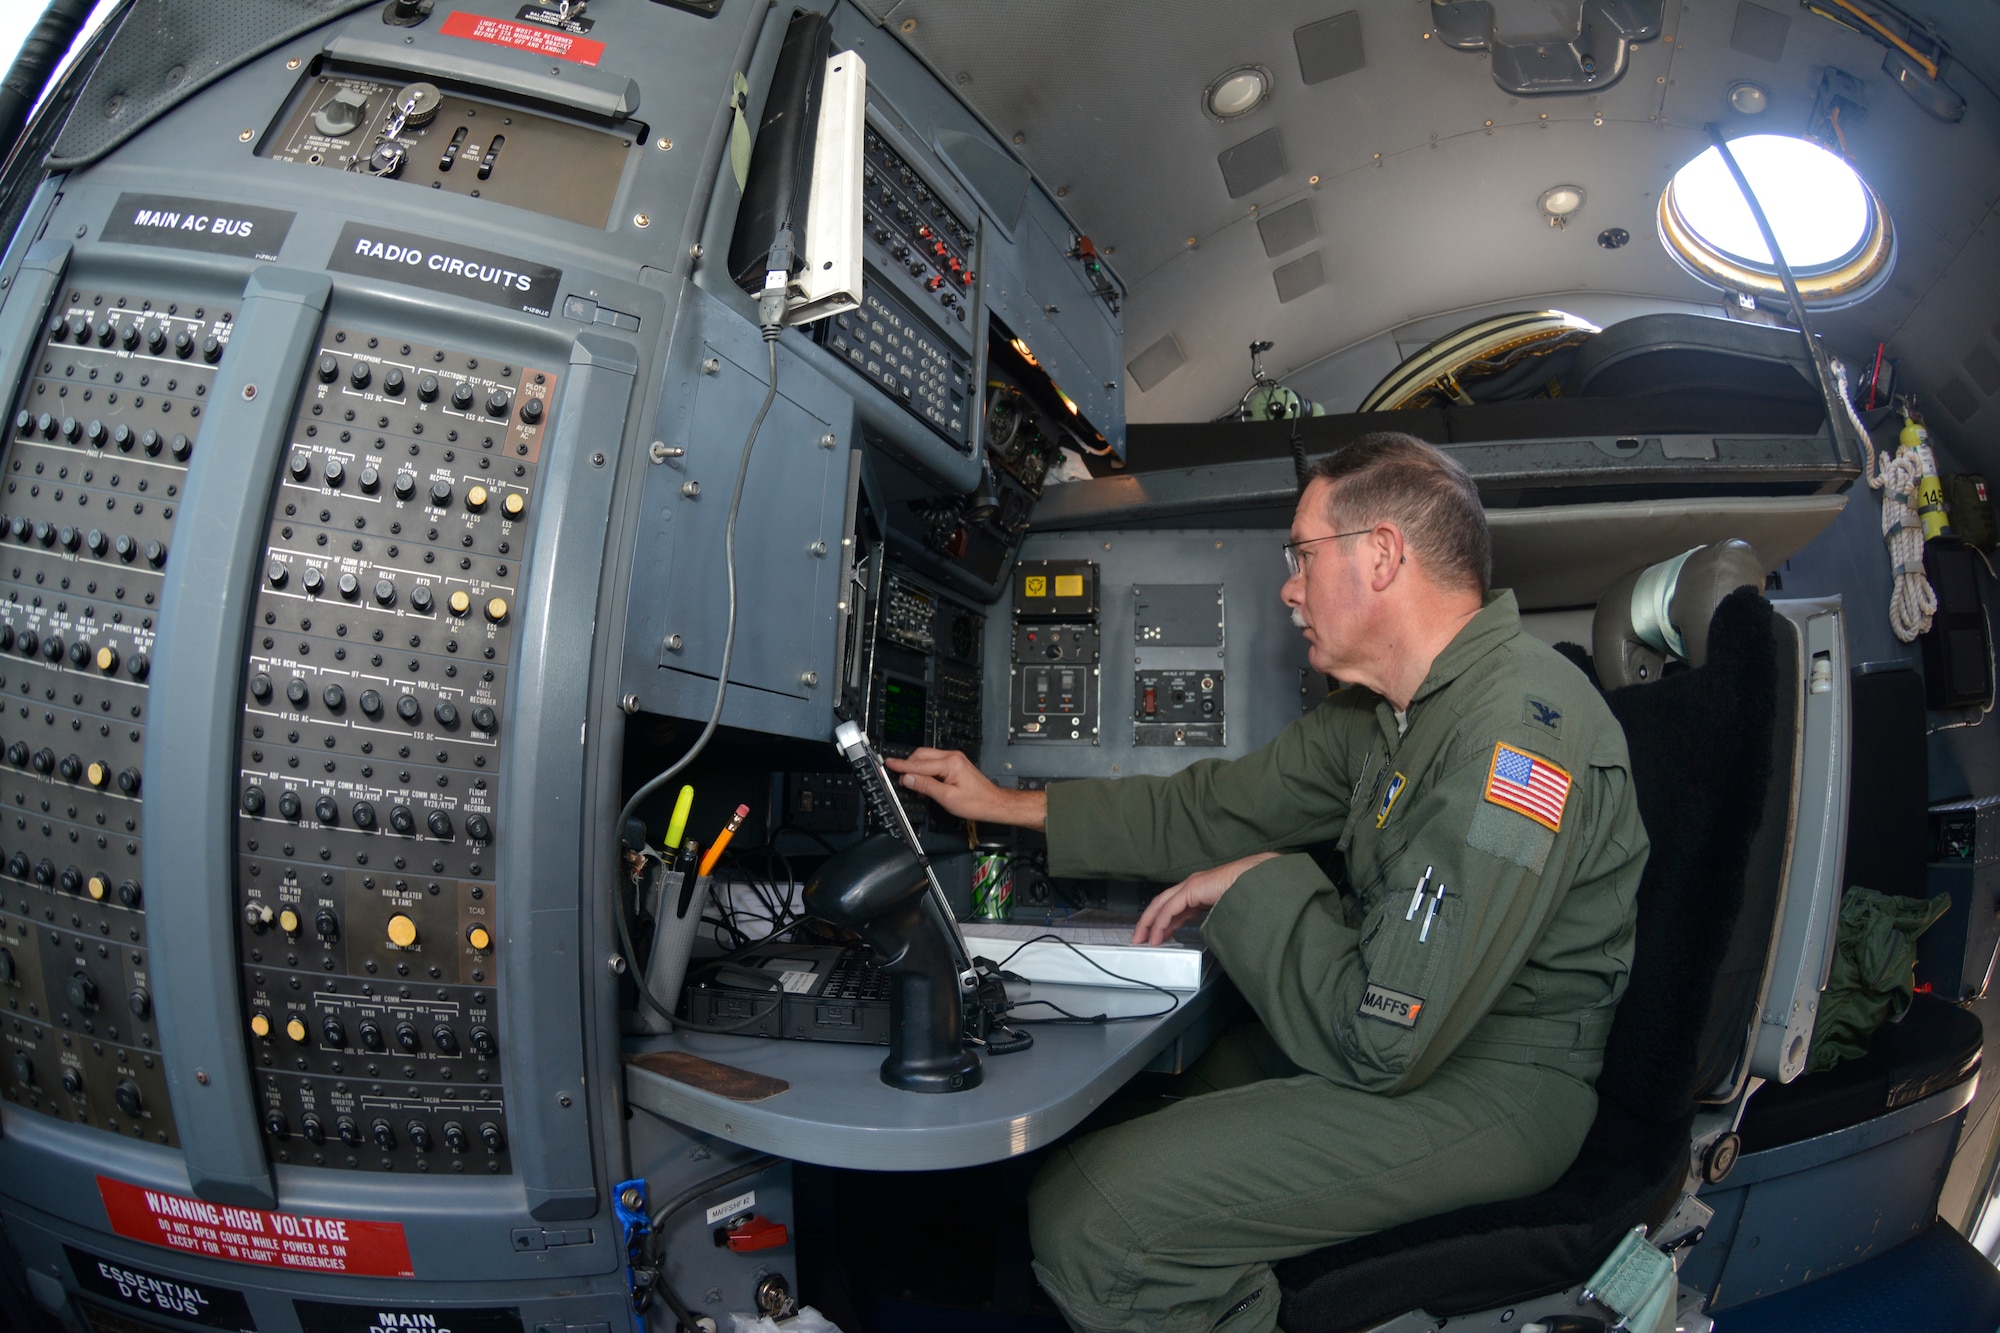 U.S. Air Force Col. Quincy “Newt” Huneycutt, III, Vice Wing commander and navigator for the 145th Airlift Wing, goes through his pre-flight checklist onboard a C-130 Hercules aircraft, at the North Carolina Air National Guard Base, Charlotte Douglas International Airport; December 10, 2015. Huneycutt, who has flown over 5,000 hours, is set to retire February 1, 2016 after serving more than 36 years in the NCANG. (U.S. Air National Guard photo by Master Sgt. Patricia F. Moran/Released)